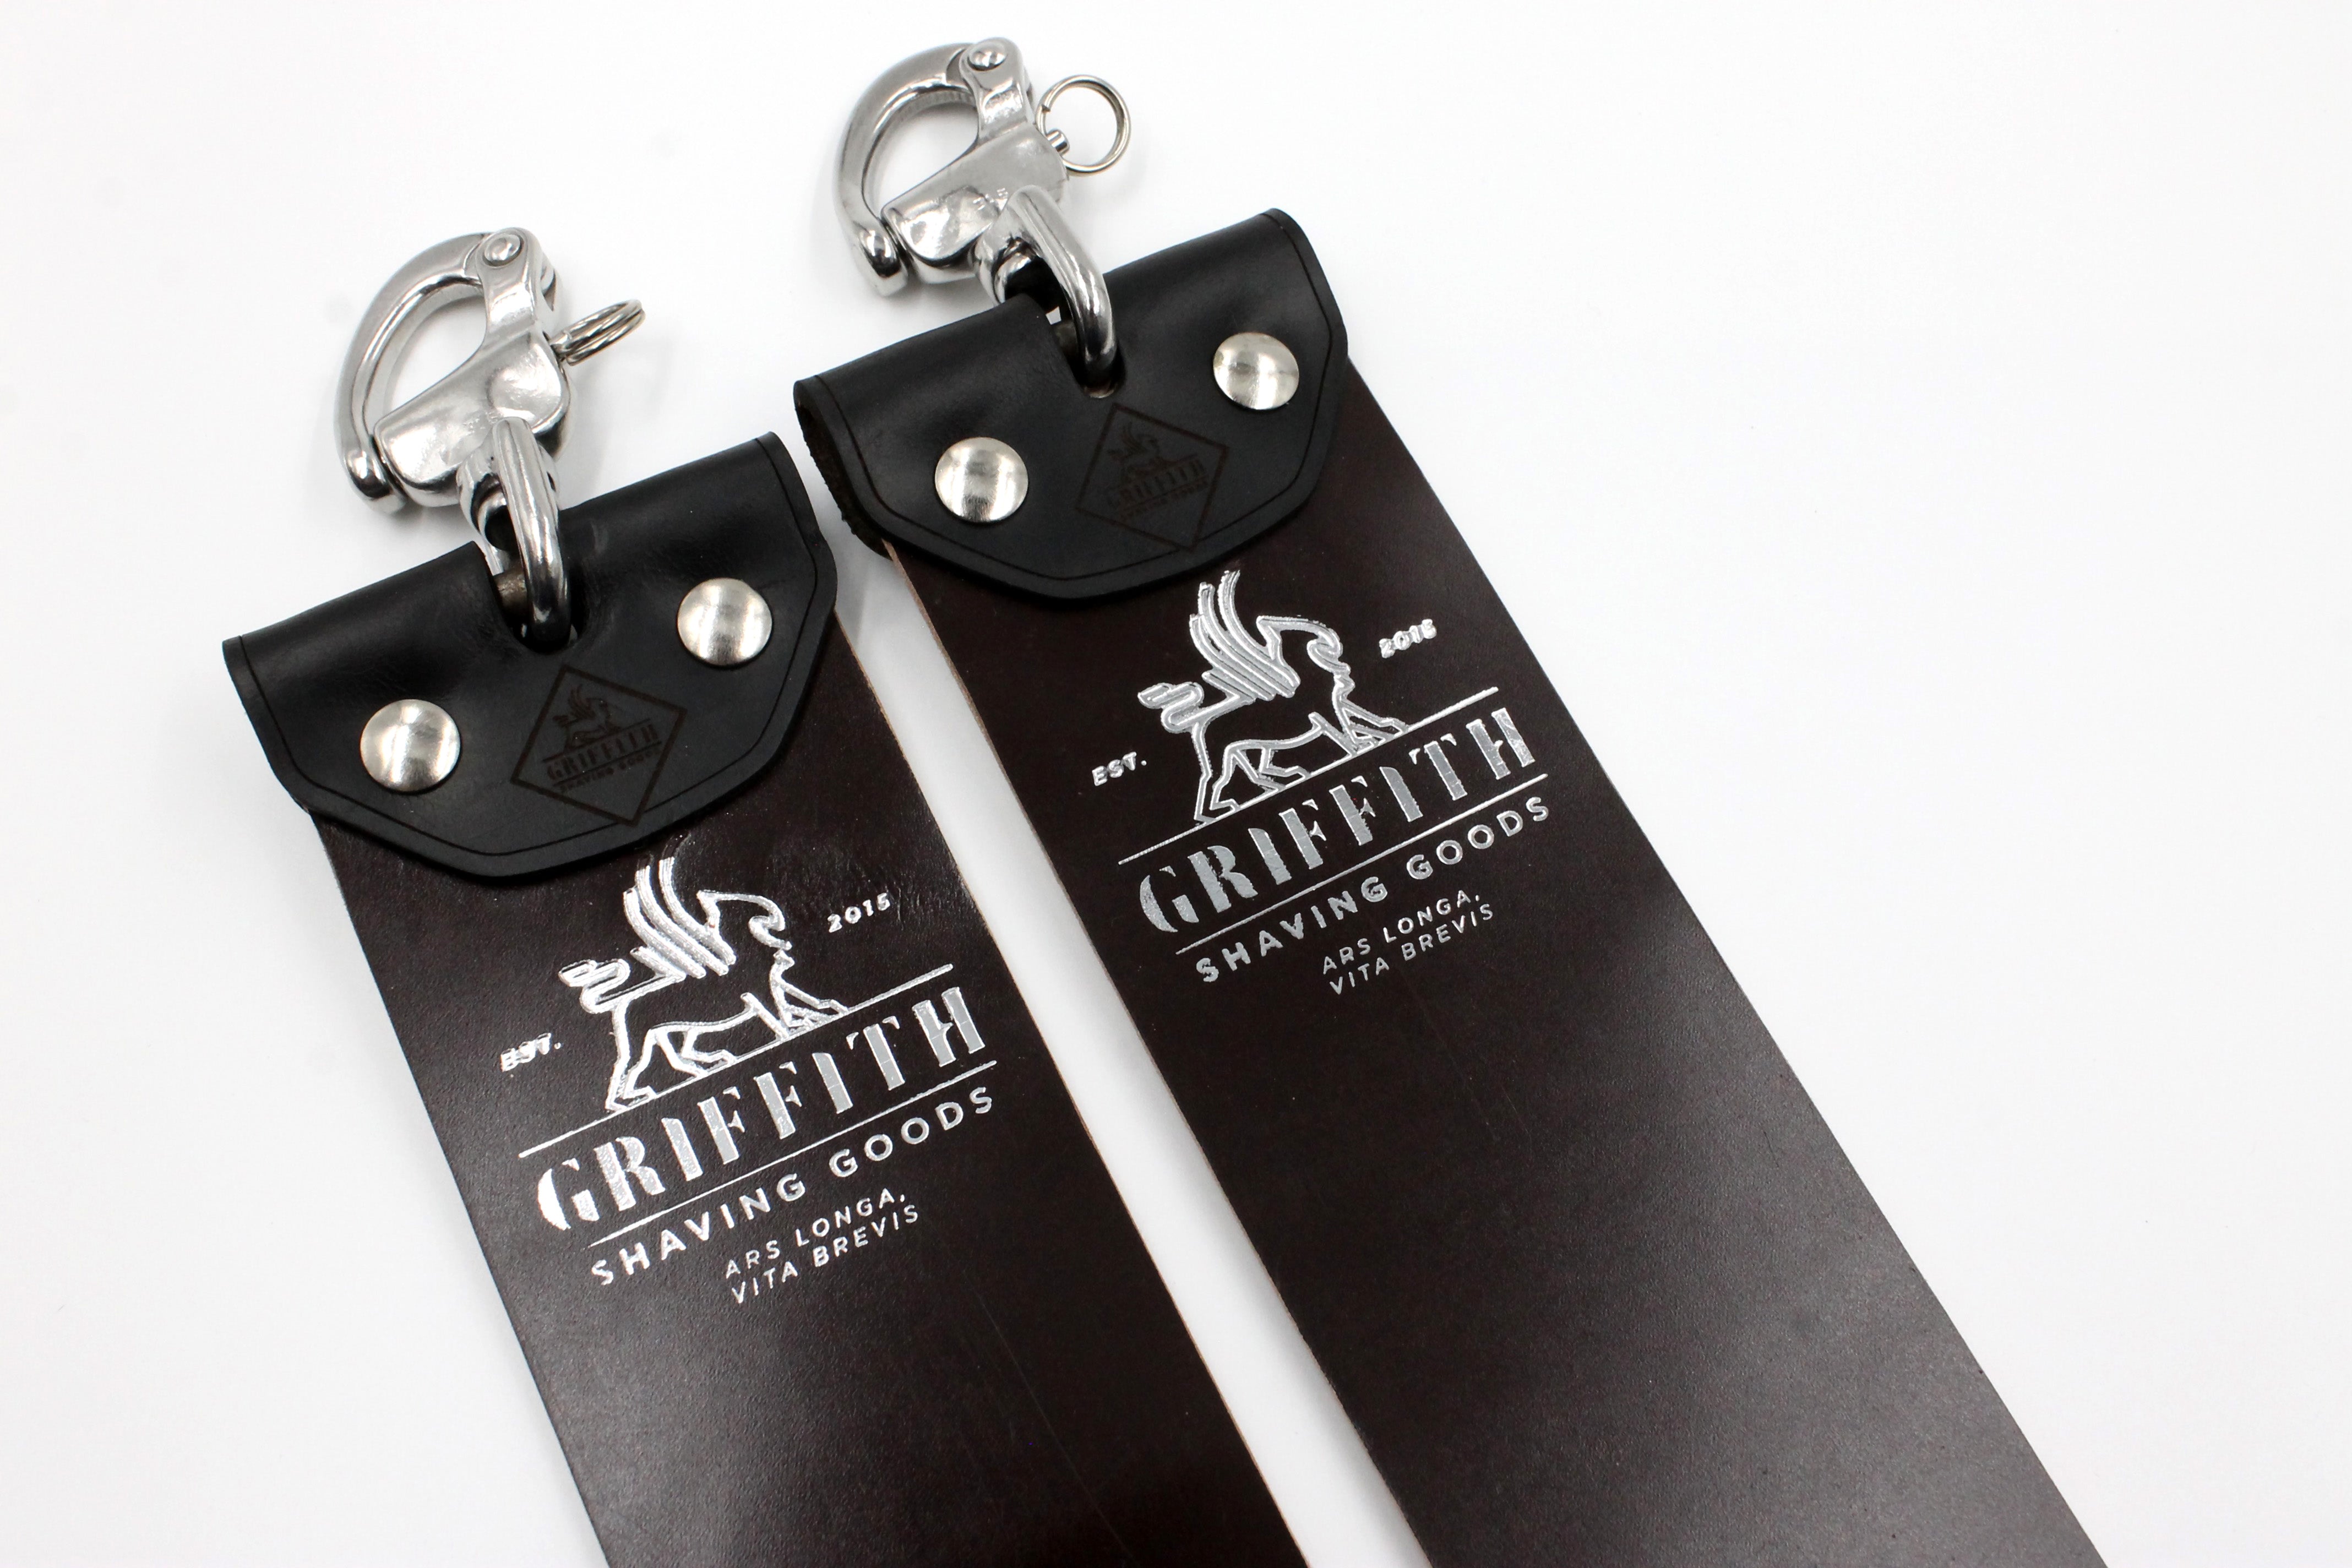 Griffith Shaving Goods British Shell Cordovan - 2 1/2 Inch Wide Barber Style Razor Strop - CHOOSE YOUR STROP